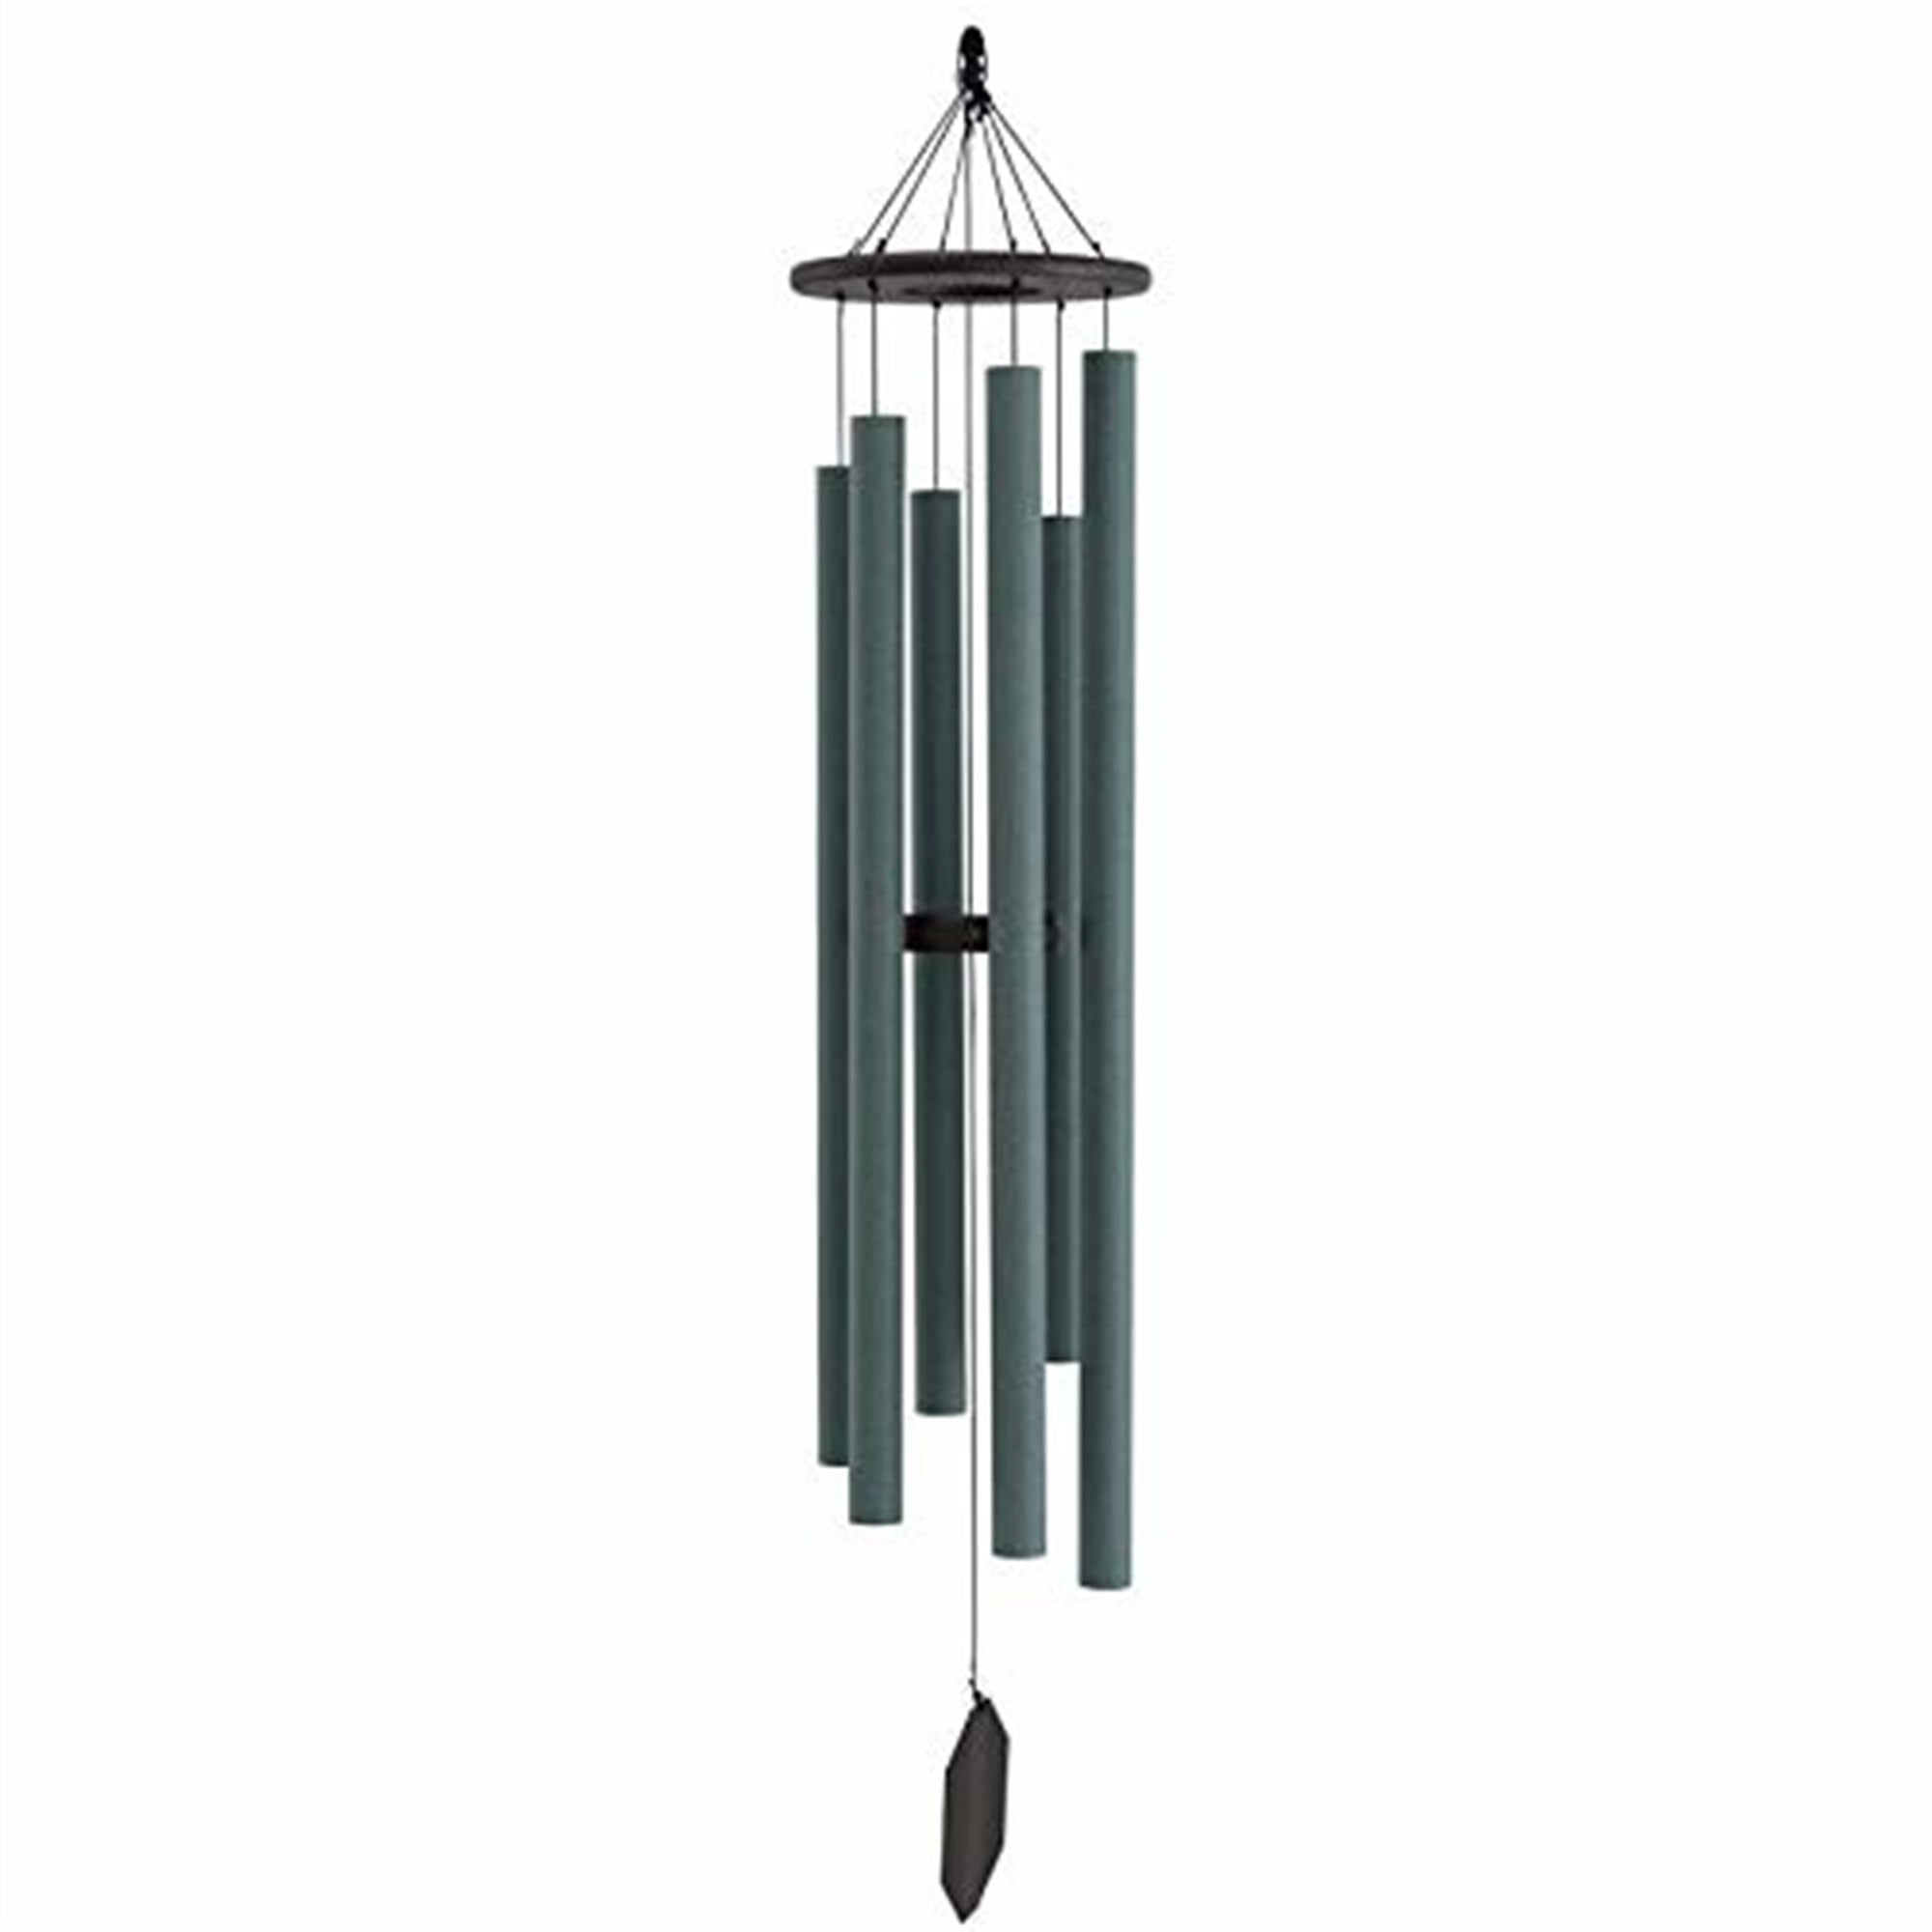 Lambright Country Chimes (#904) Sonic Sound Wave Wind Chime, 56"